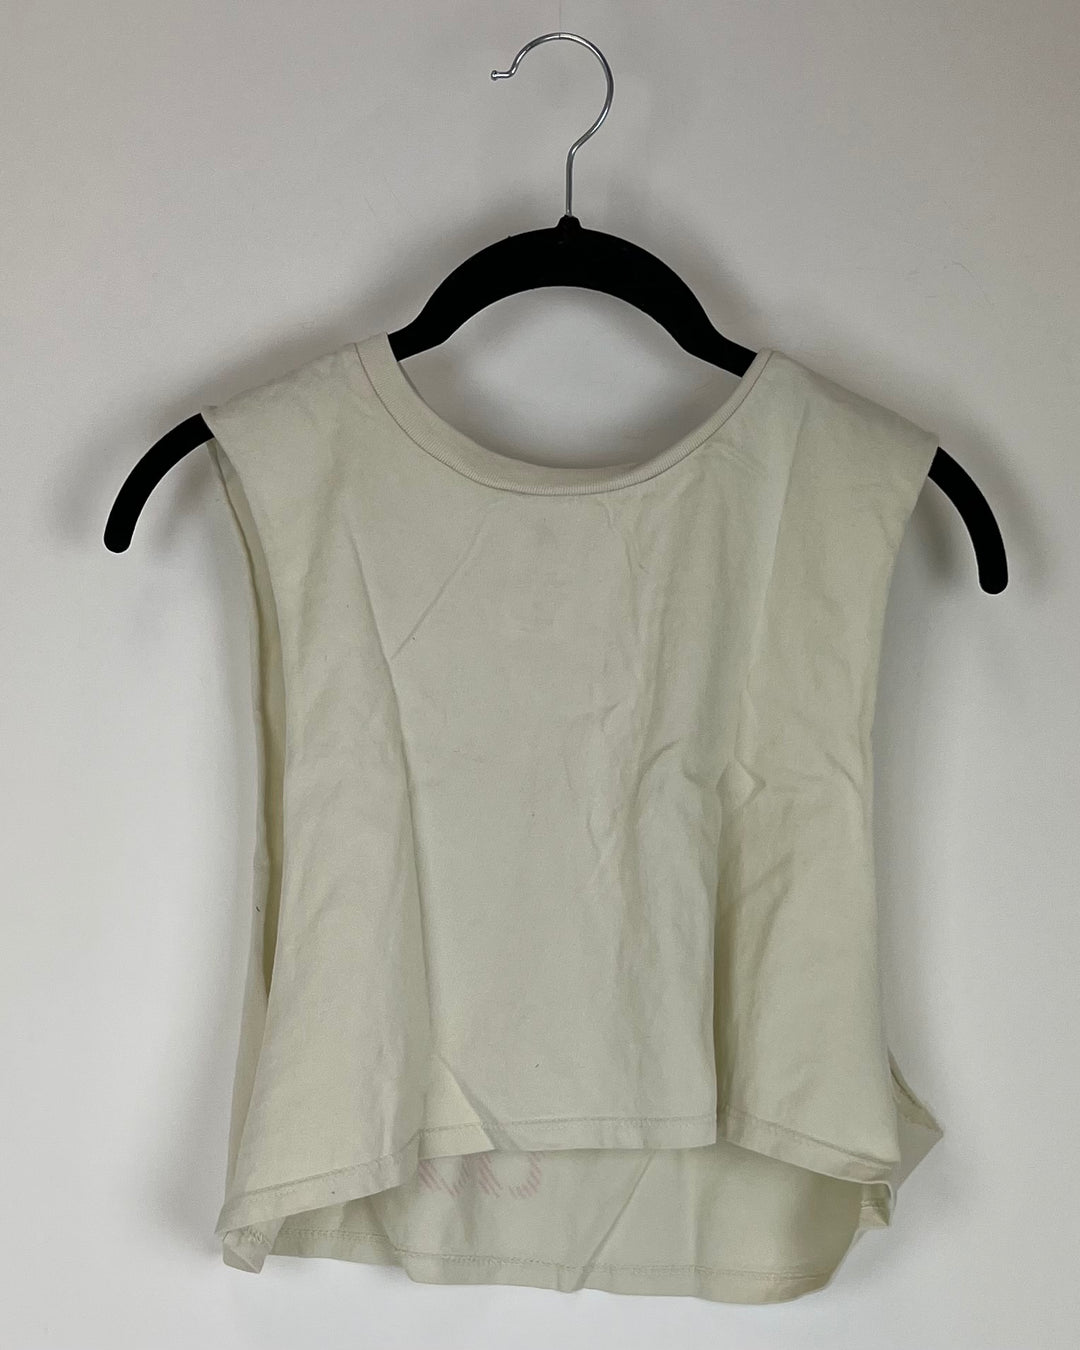 Cream "Go All Out" Crop Tank Top - 0/2